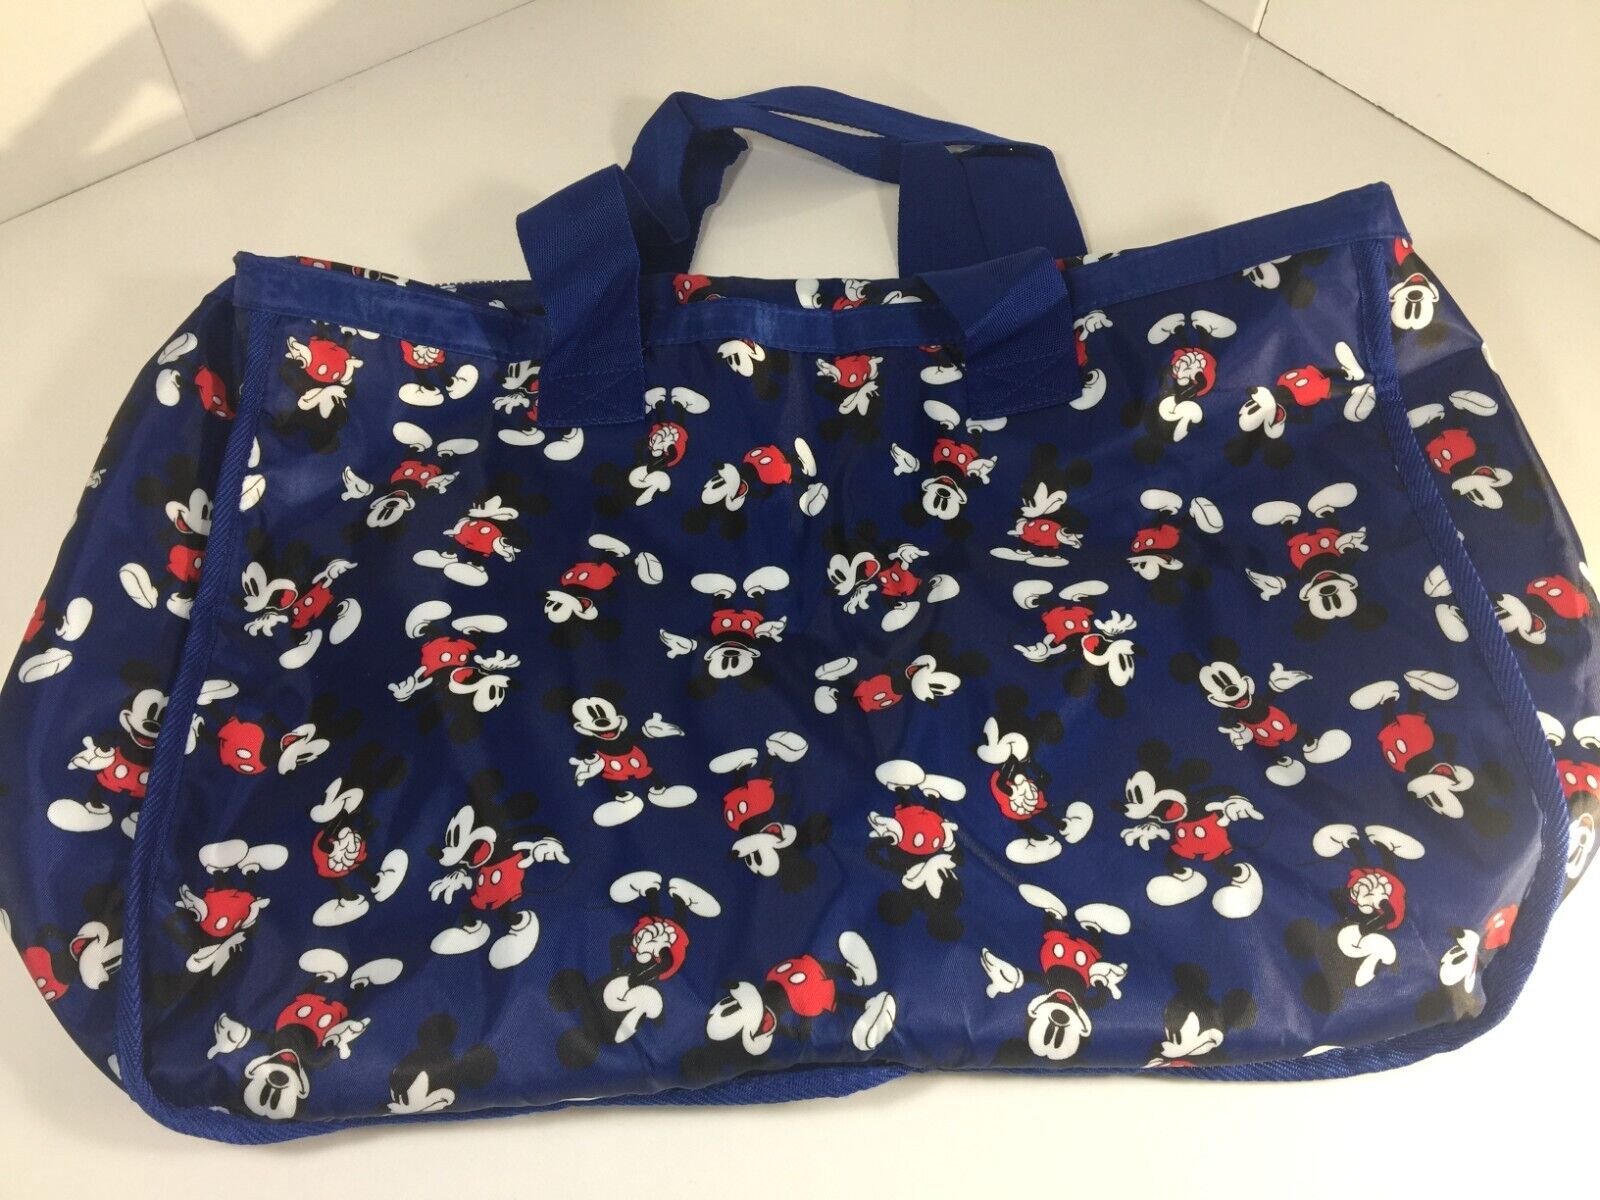 Disney Mickey Mouse Large Travel Duffle Tote Bag Royal Blue Great Condition